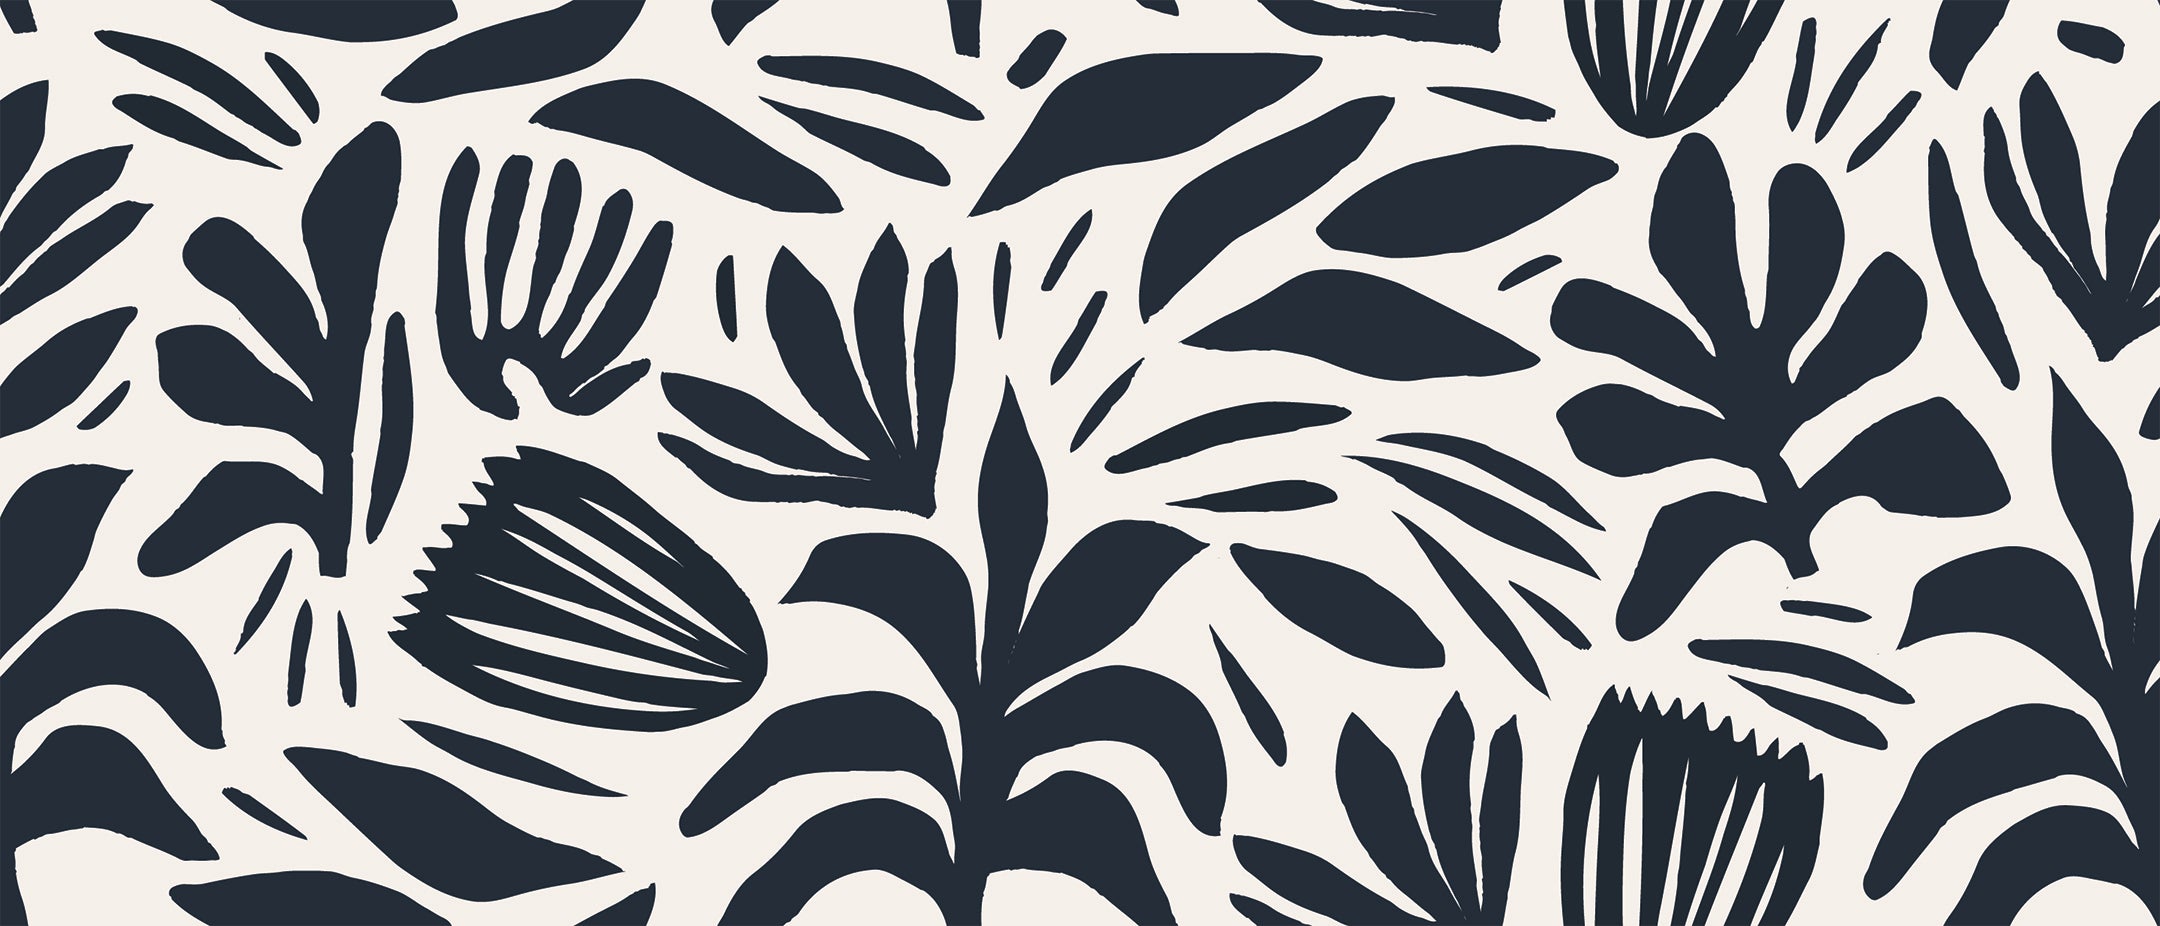 A detailed close-up of the Dark Bloom Wallpaper, featuring bold black abstract floral and leaf patterns on a white background.